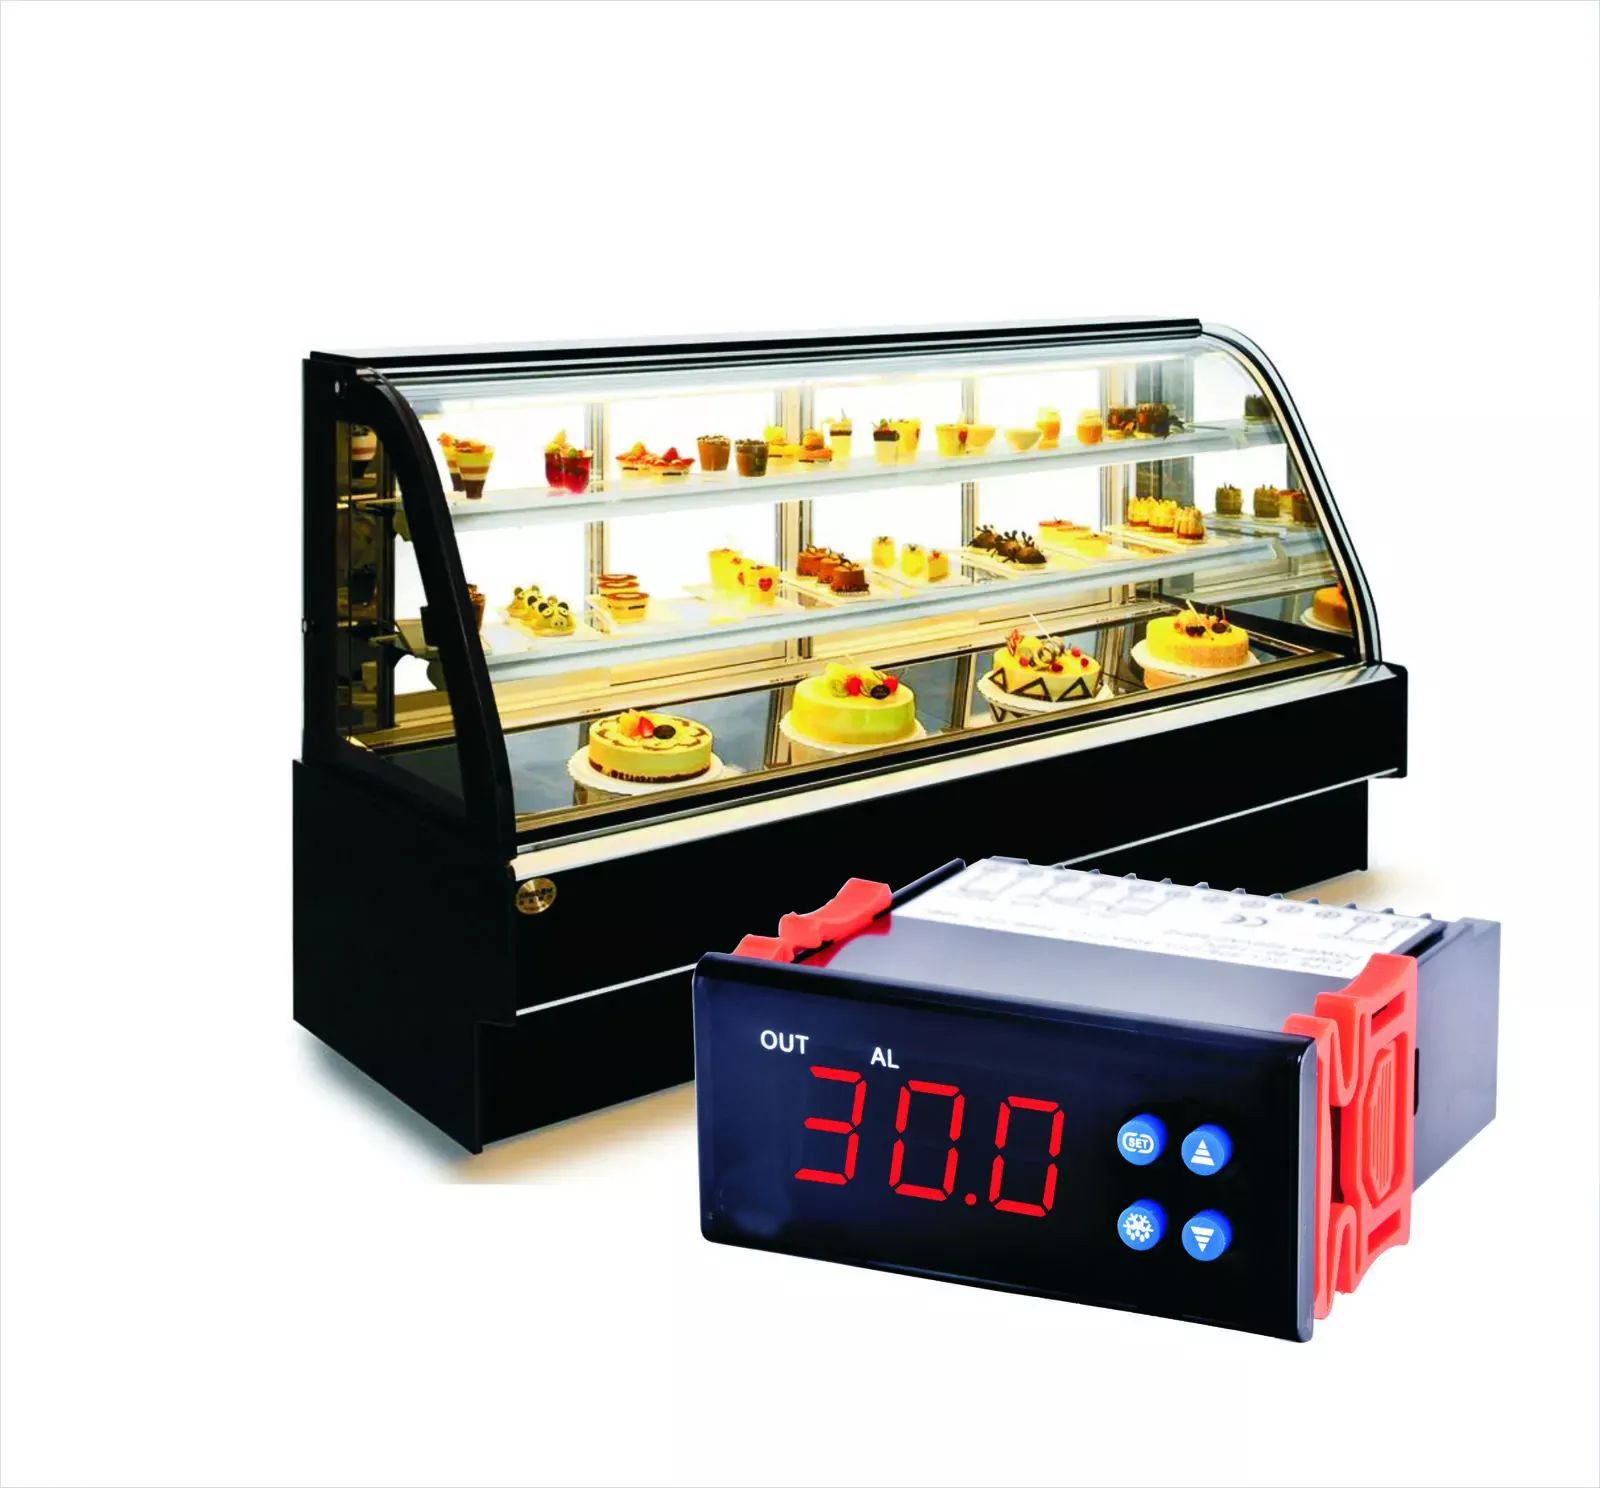 CL309+ with overtemperature alarm controller for refrigerator